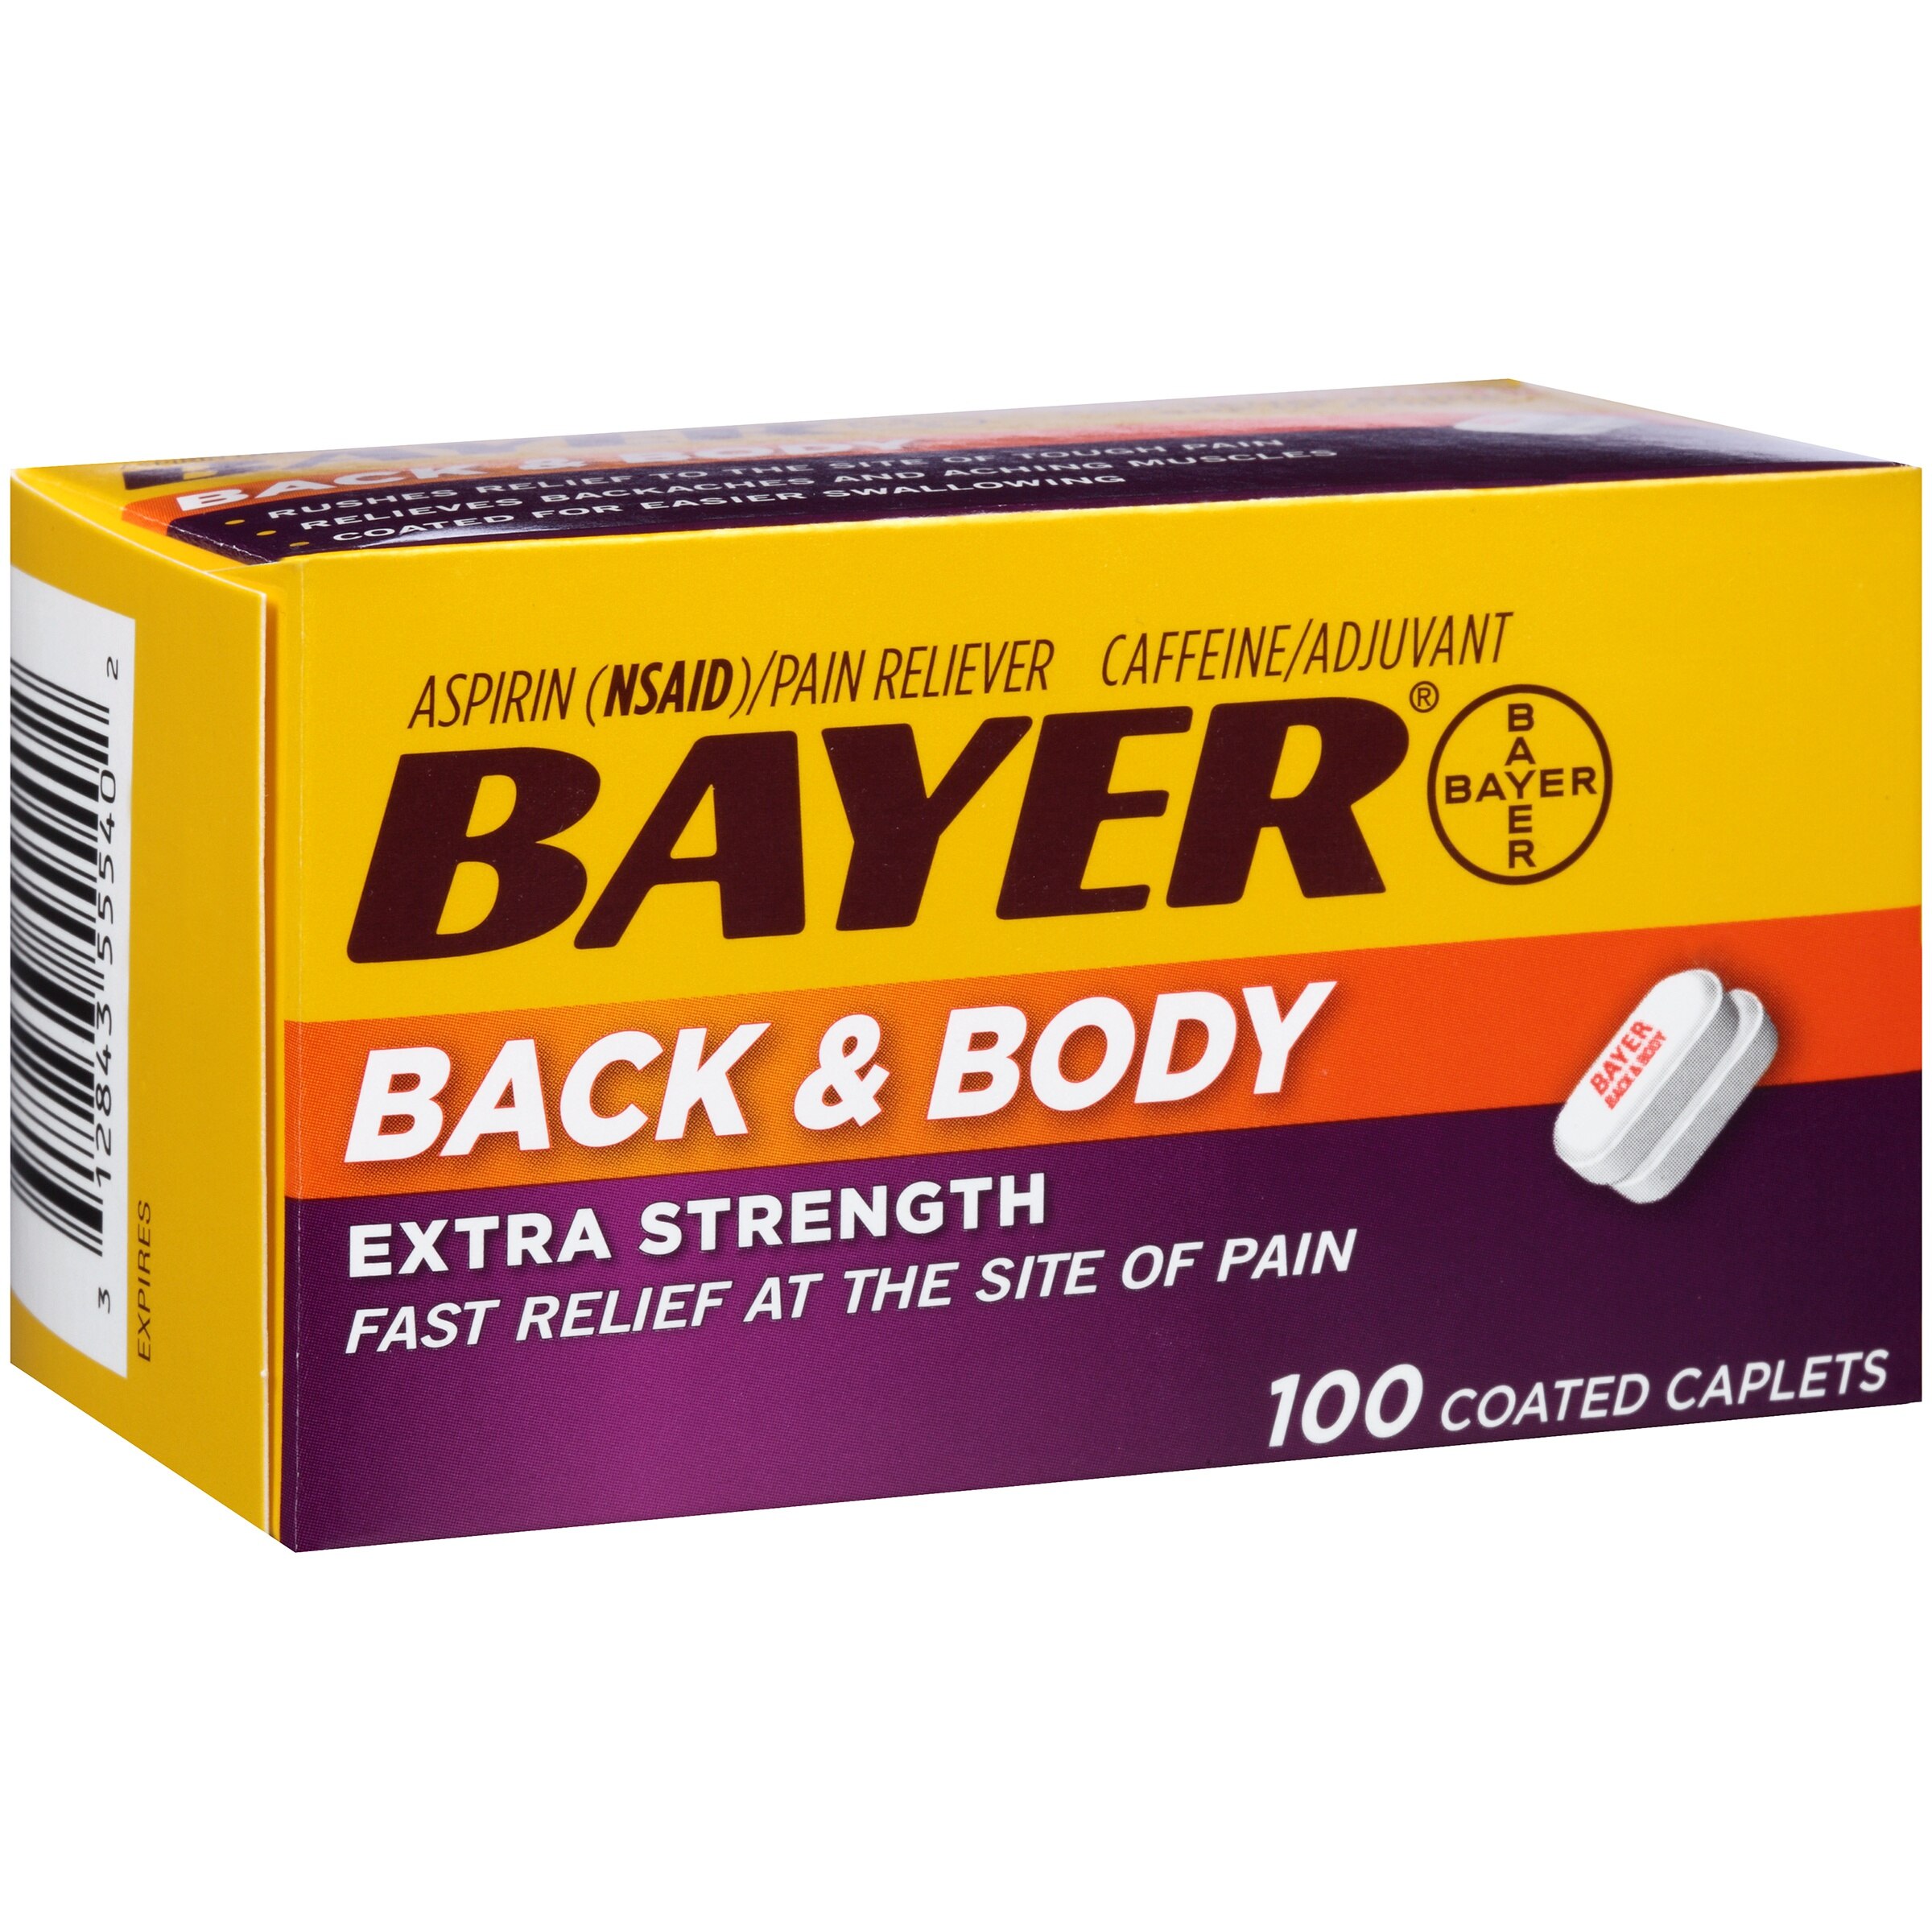 Bayer Back & Body Extra Strength Aspirin, 500mg Coated Tablets, Fast Relief, 100 ct